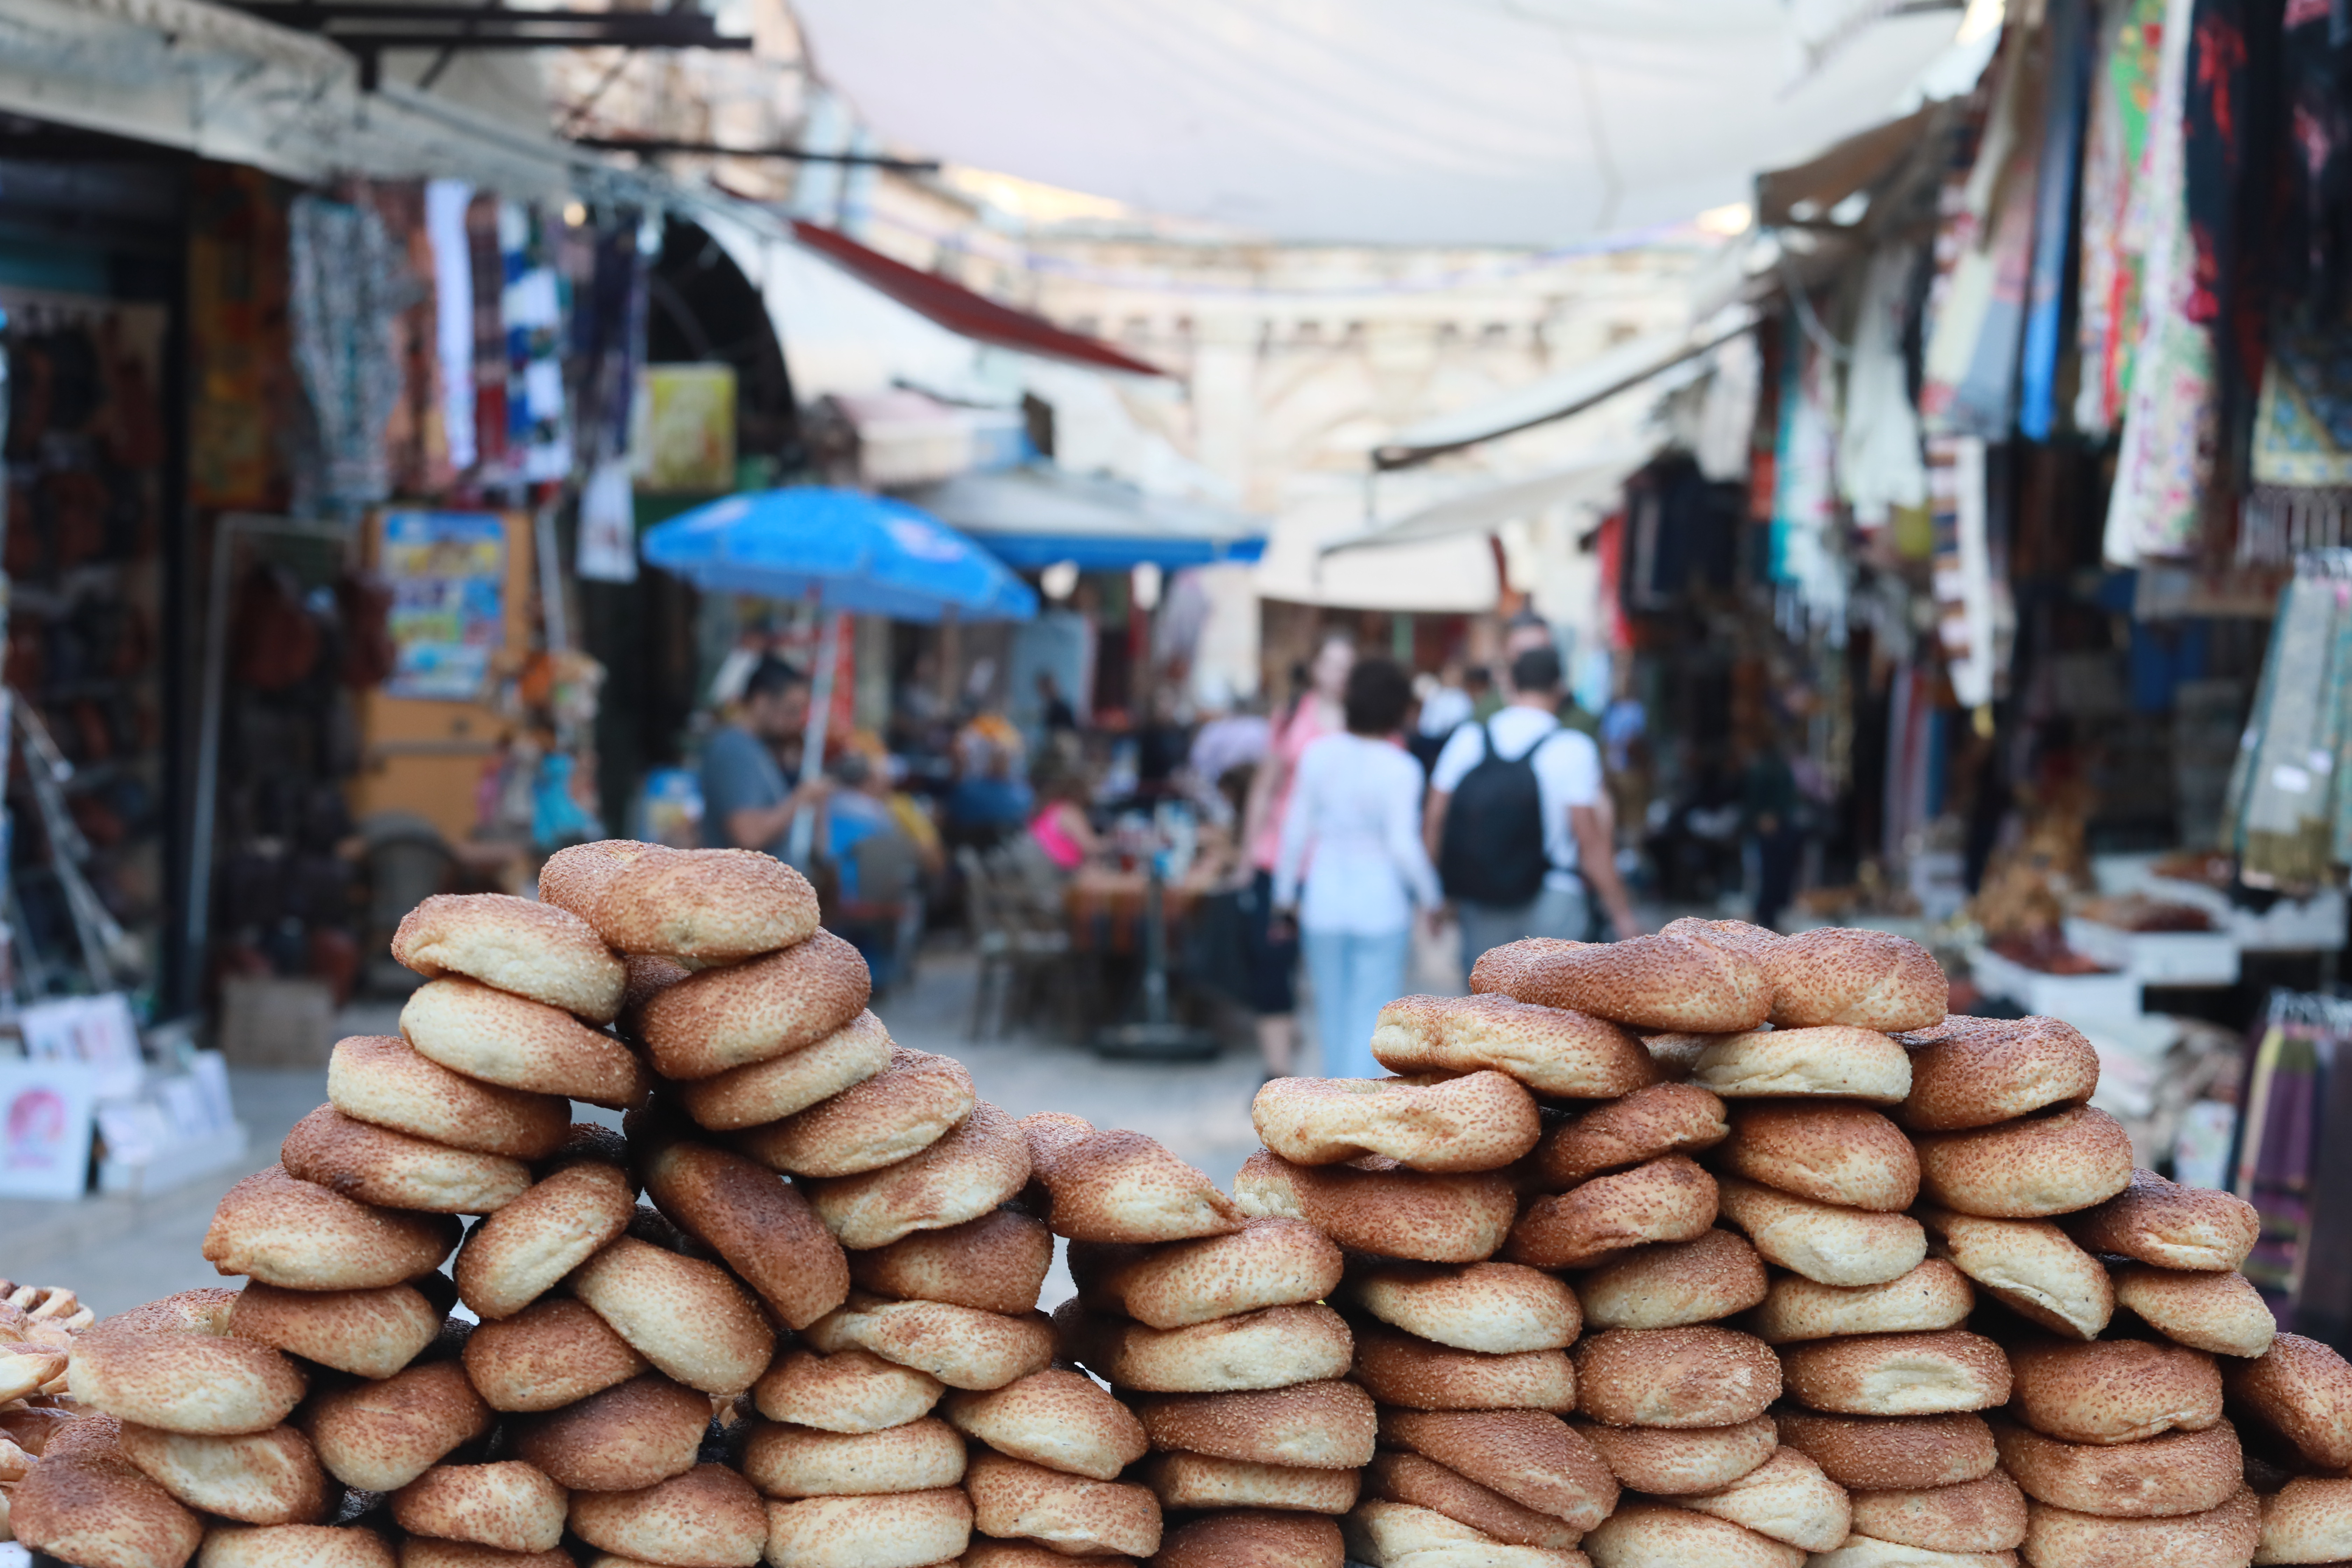 Bread stacked up for sale in the market